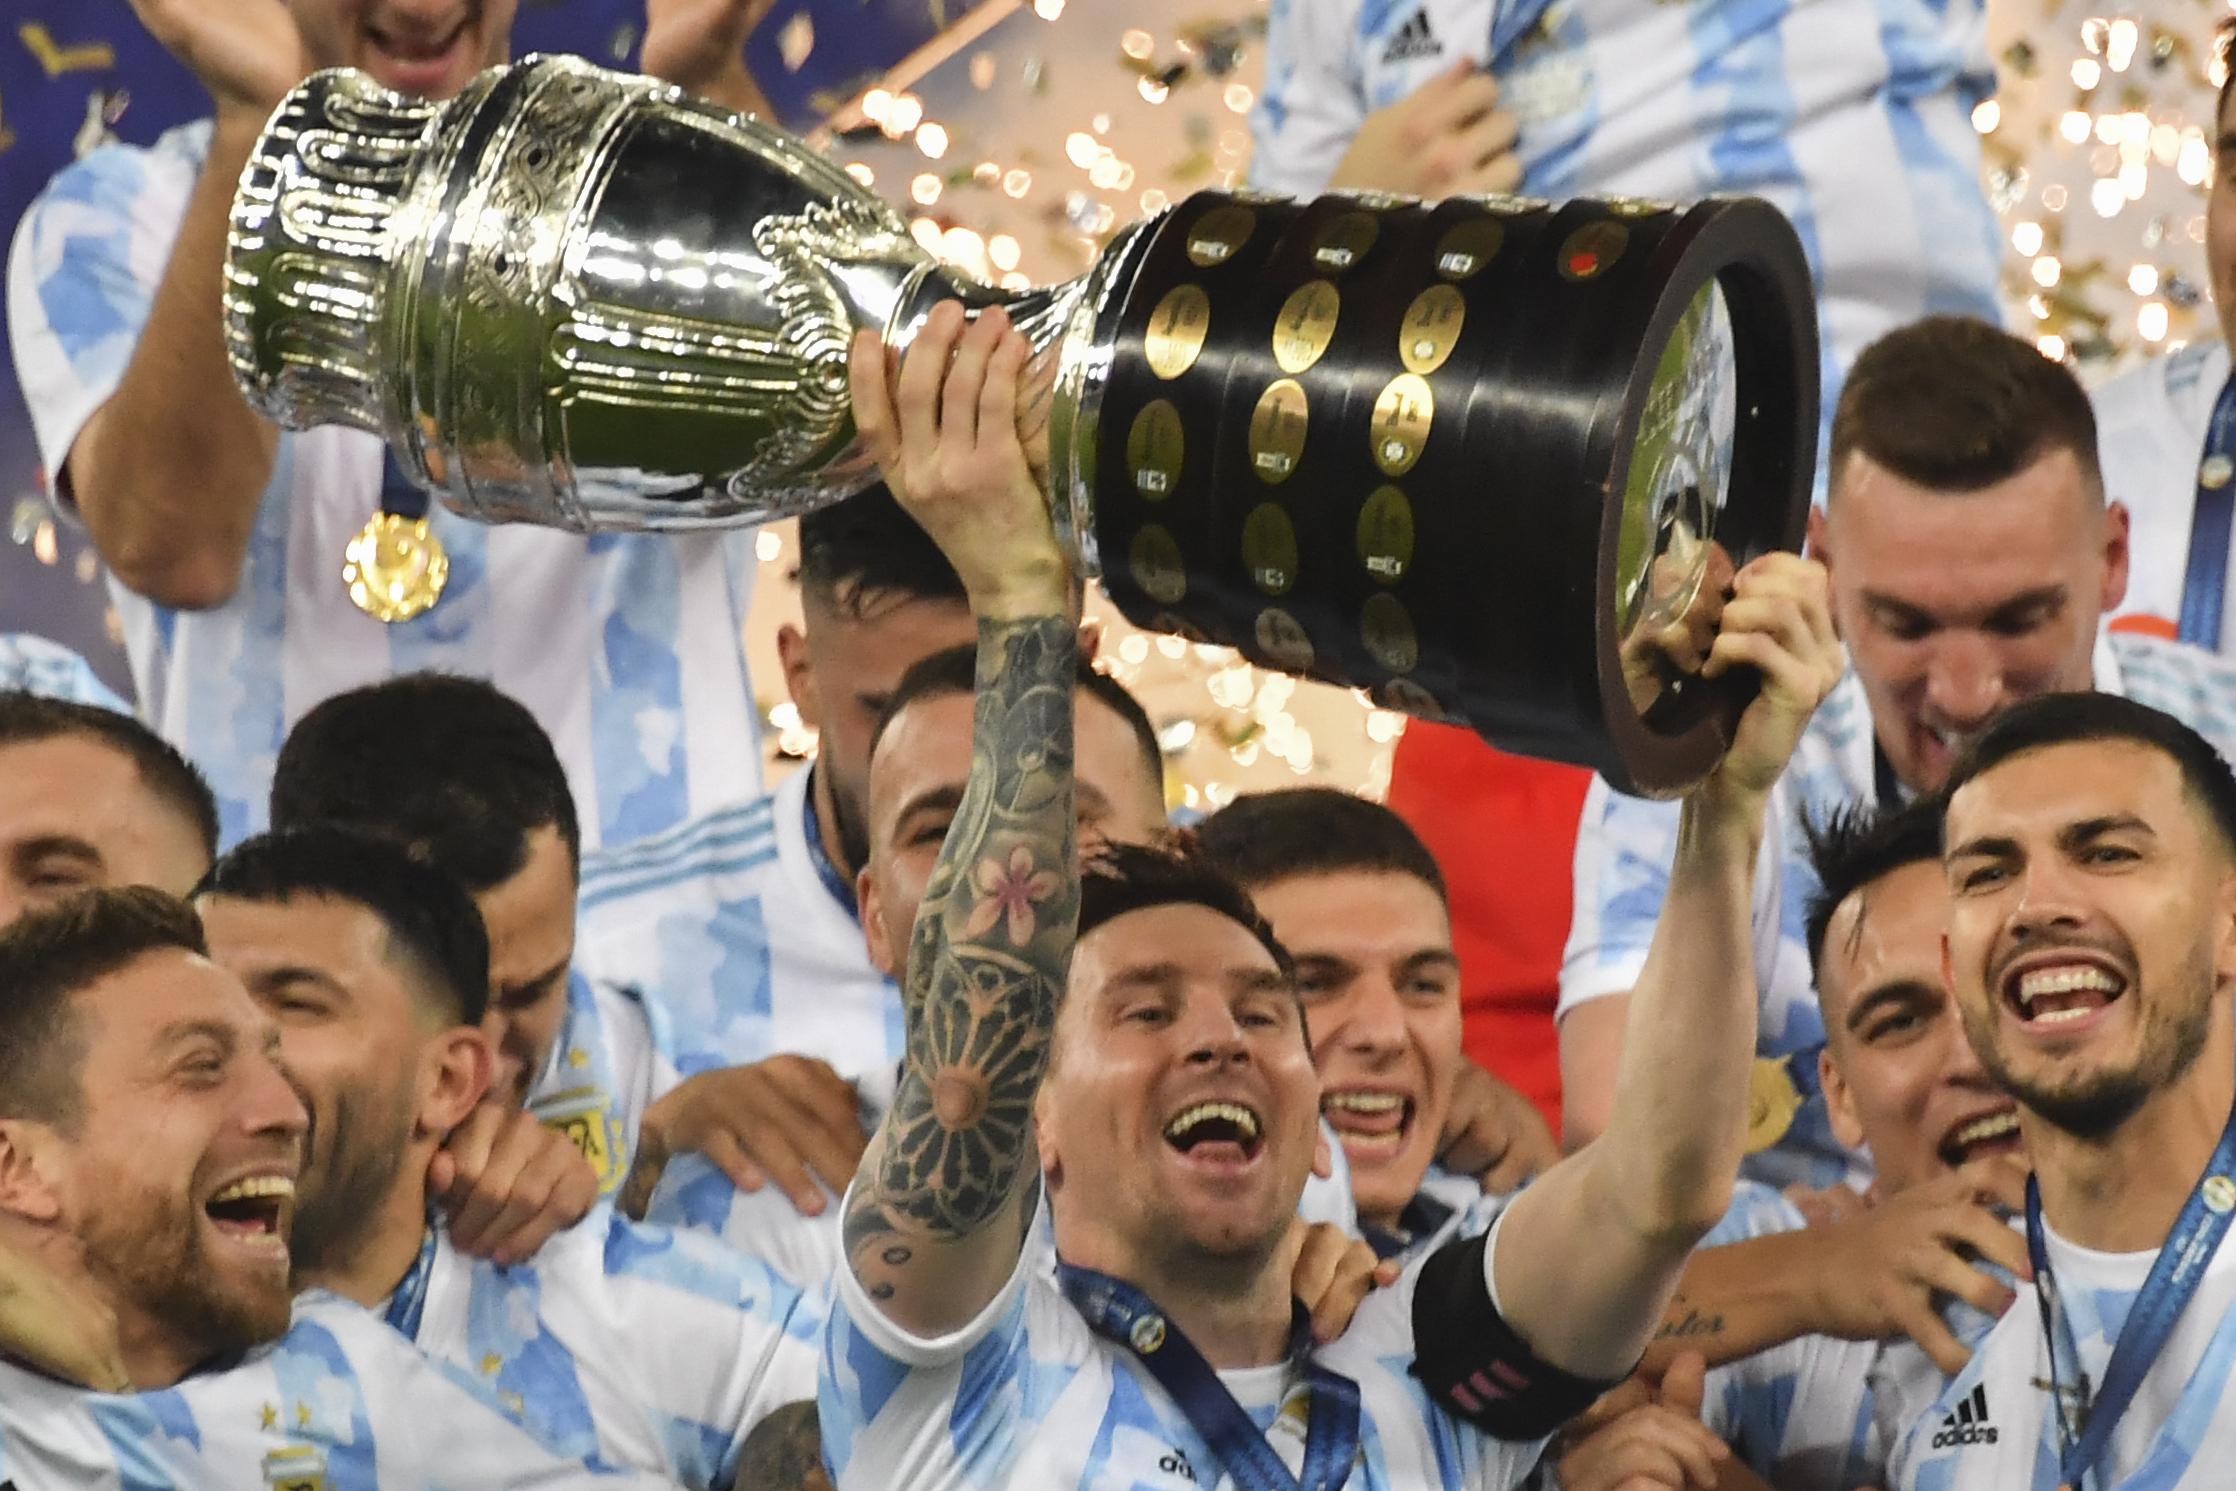 Argentina's Lionel Messi holds the trophy as he celebrates on the podium with teammates after winning the Conmebol 2021 Copa America football tournament final match against Brazil at Maracana Stadium in Rio de Janeiro, Brazil, on July 10, 2021.